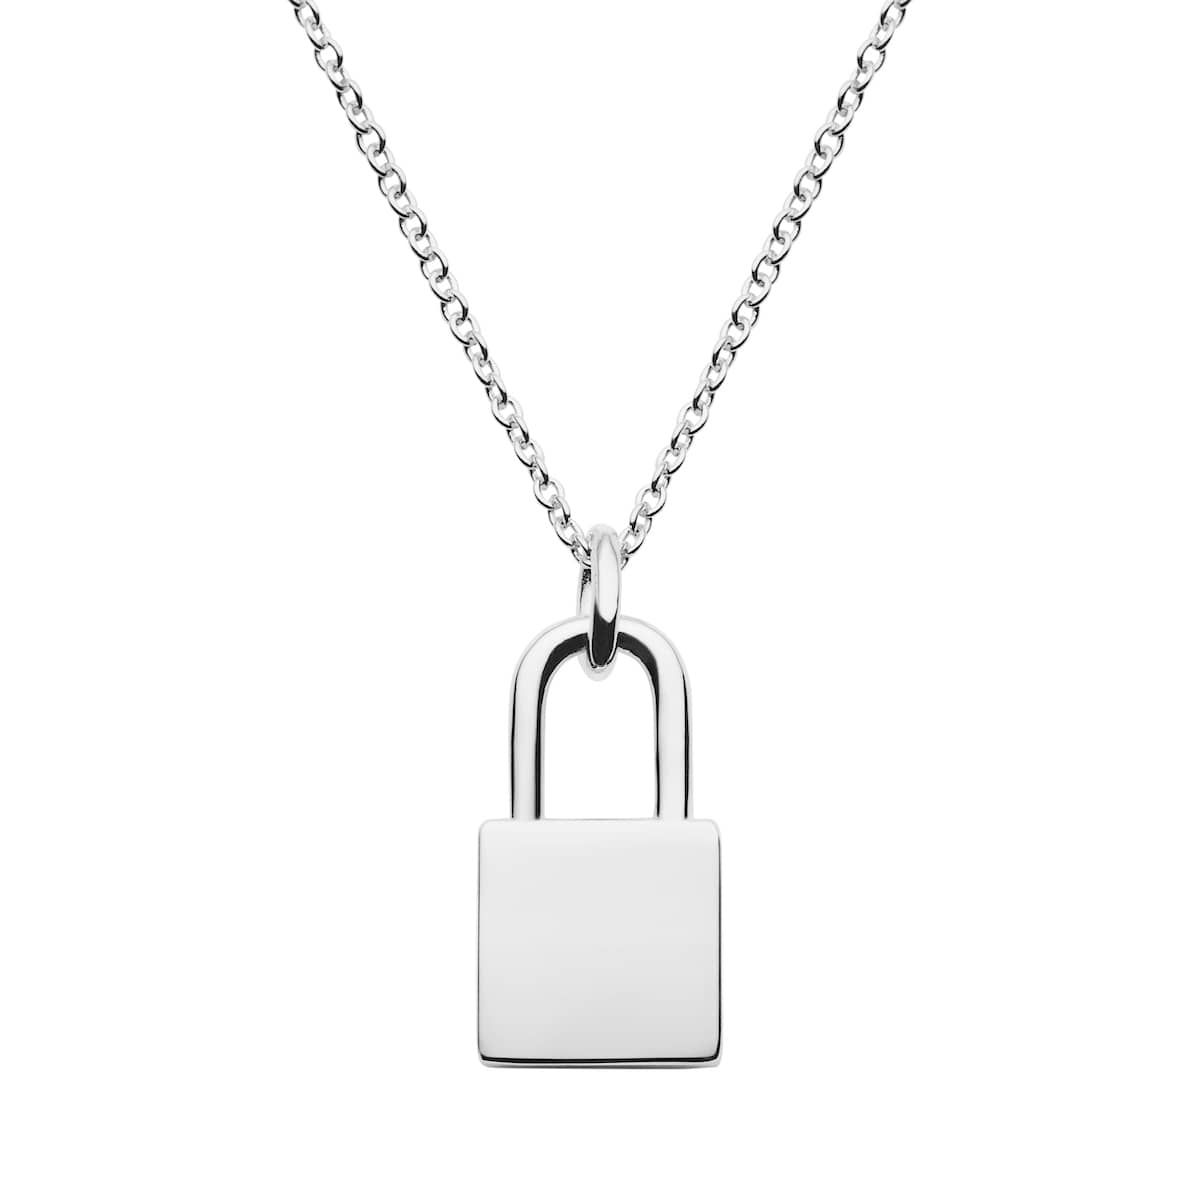 sterling silver lock necklace engrave with name, initials special date etc